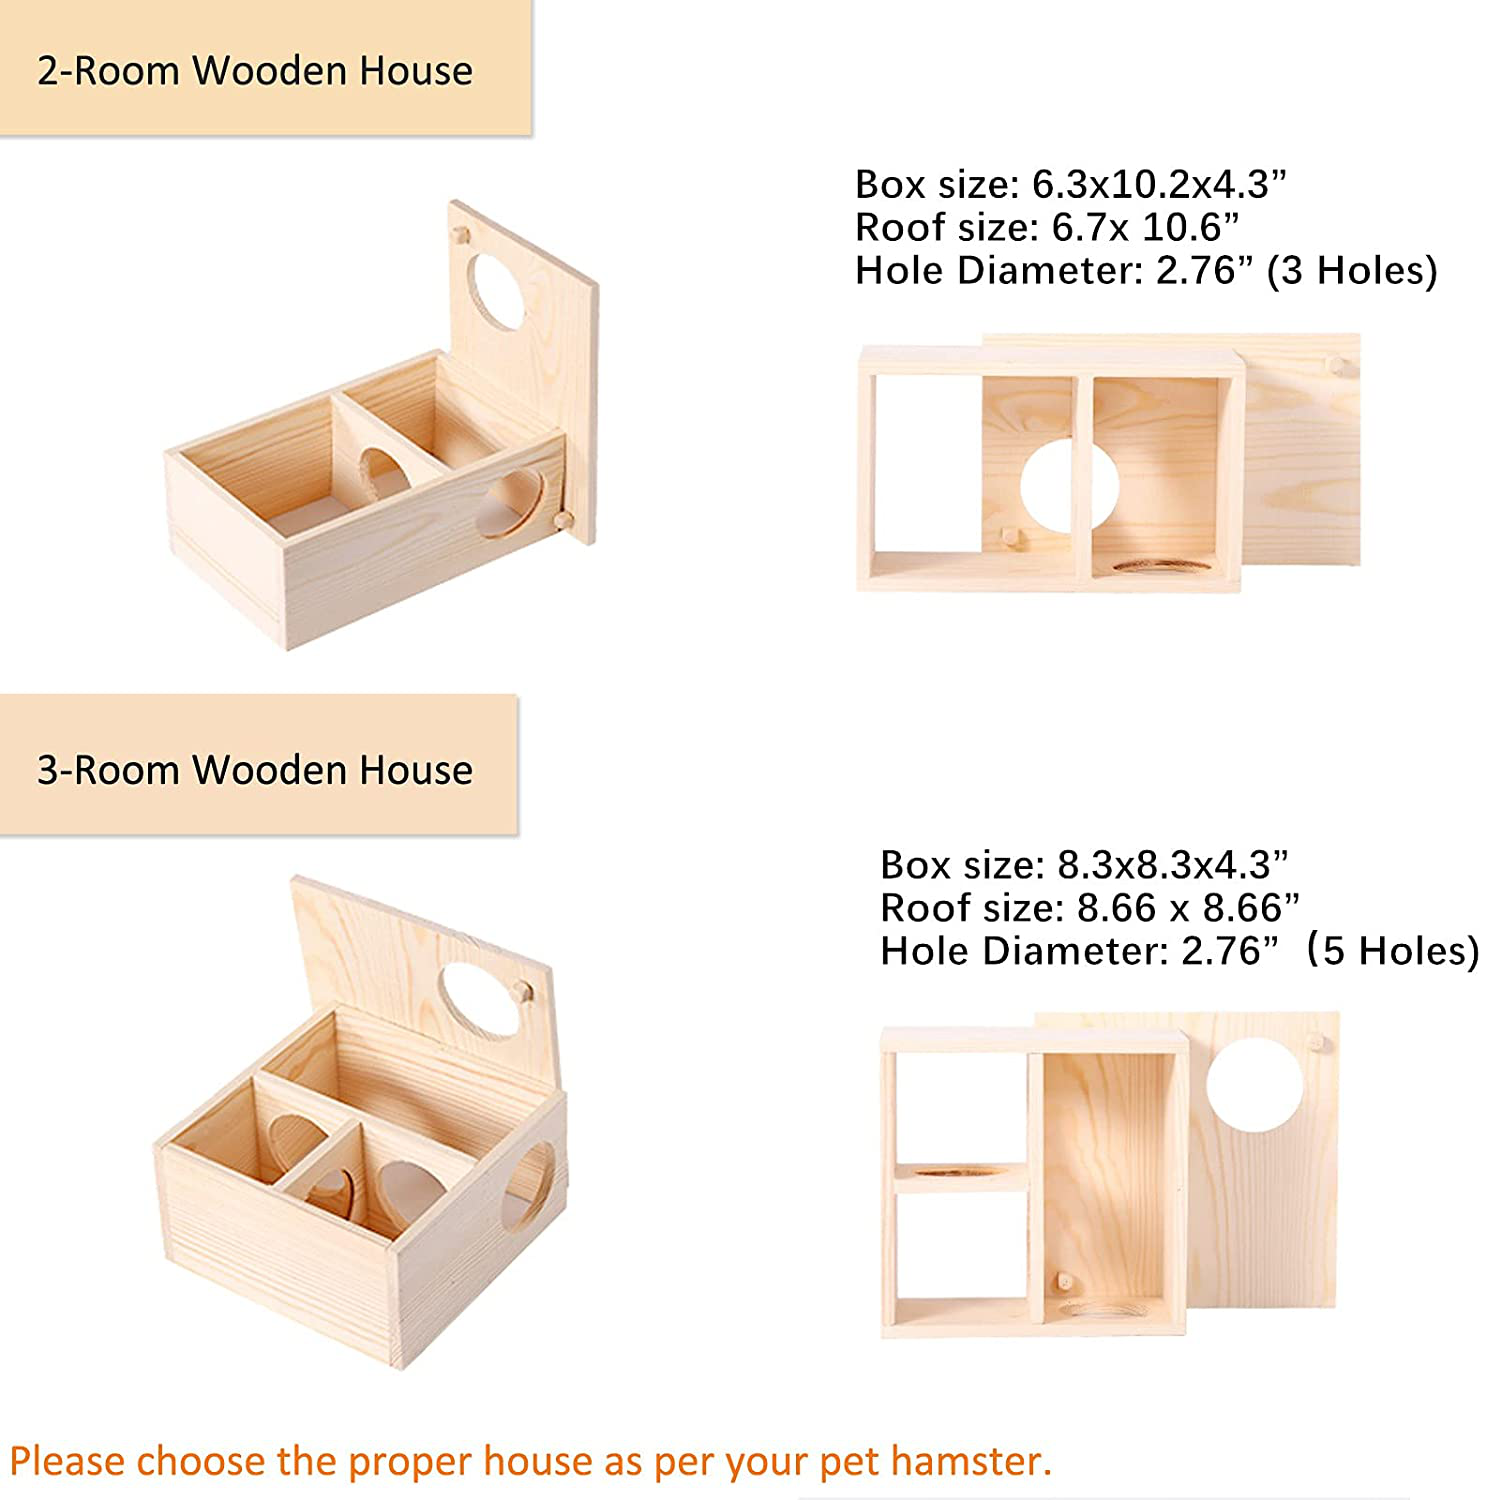 Multi-Room Hamster Wooden House, Pet Cages Accessories Chew Climbing Toys, Small Animal Flat Top Nesting Habitat Decor Maze, Play Hut Hideout Platform for Dwarf Syrian Macaroni Hamster Chipmunk Gerbil